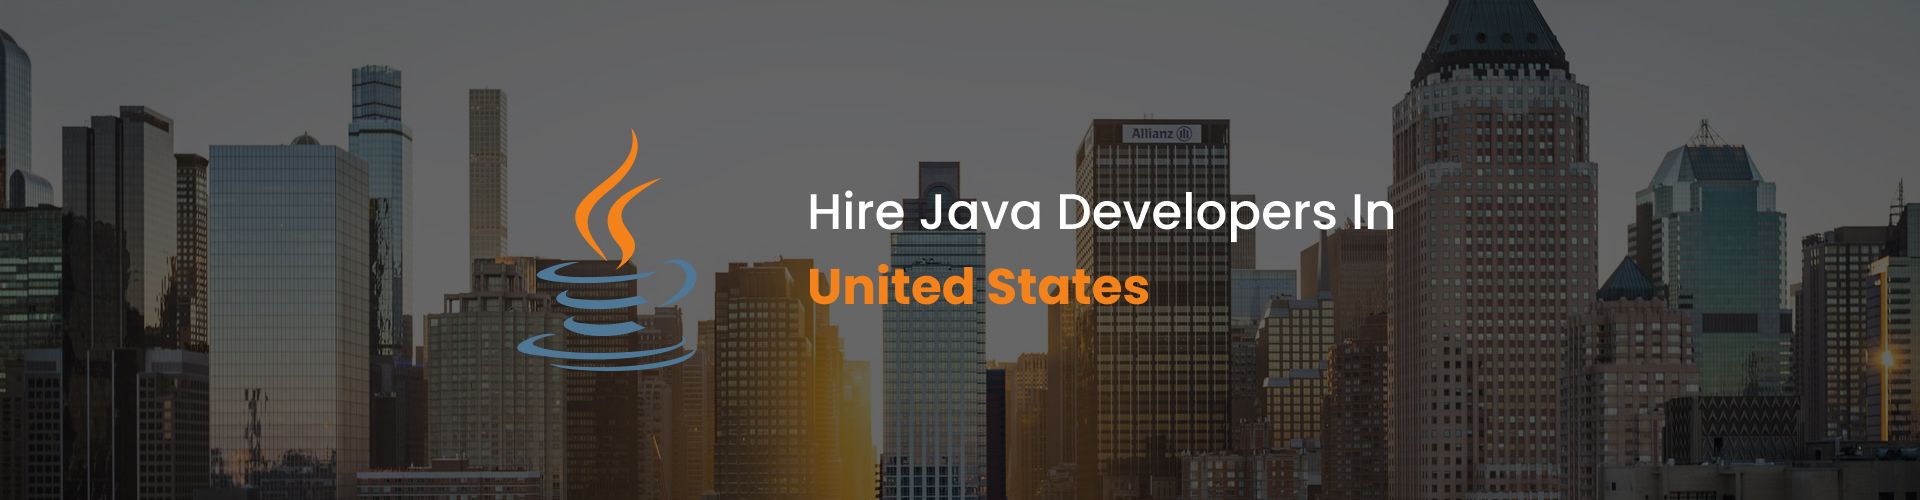 hire java developers in united states